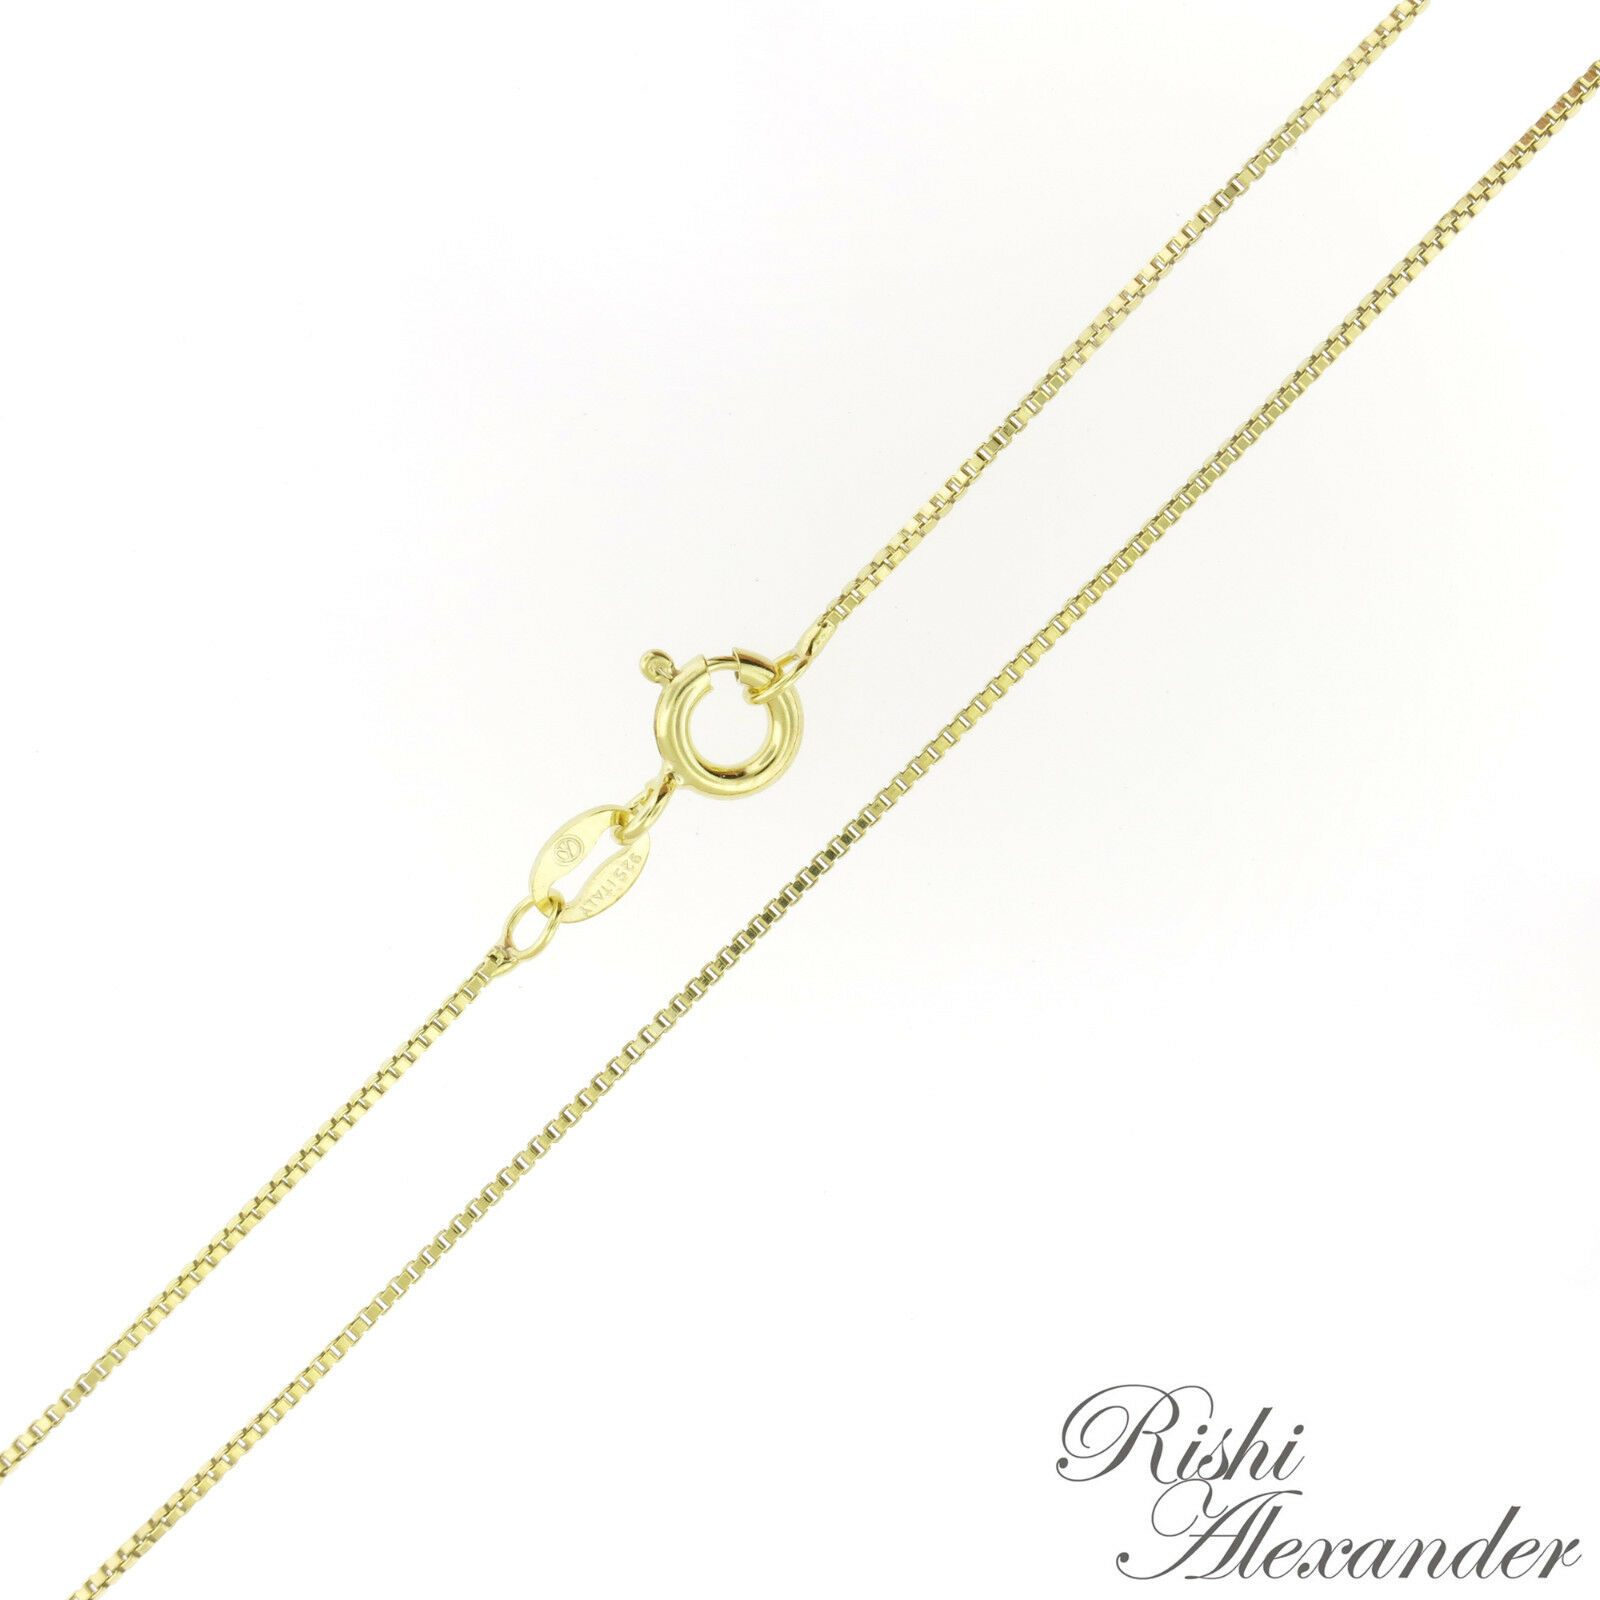 14k Gold Over 925 Sterling Silver Box Chain Necklace Vermeil .8mm Stamped 925